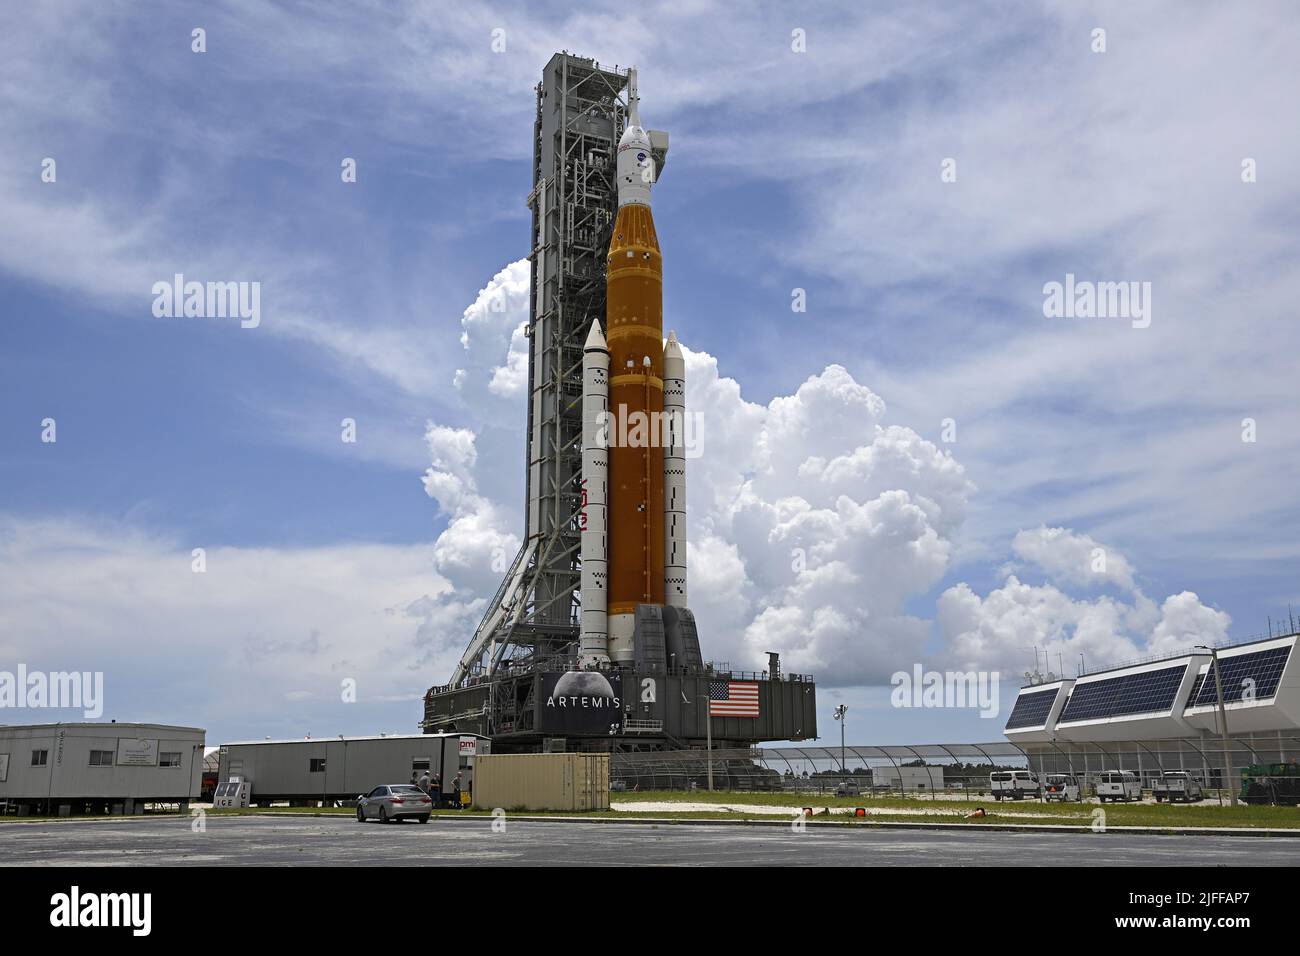 NASA's SLS rocket rolls back to the Vehicle Assembly Building at the Kennedy Space Center, Florida on Saturday, July 2, 2022. The booster and the Orion spacecraft will undergo final preparations for its maiden launch. The Artemis program will utilize SLS and Orion to fly Americans back to the moon and beyond. Photo by Joe Marino/UPI Credit: UPI/Alamy Live News Stock Photo